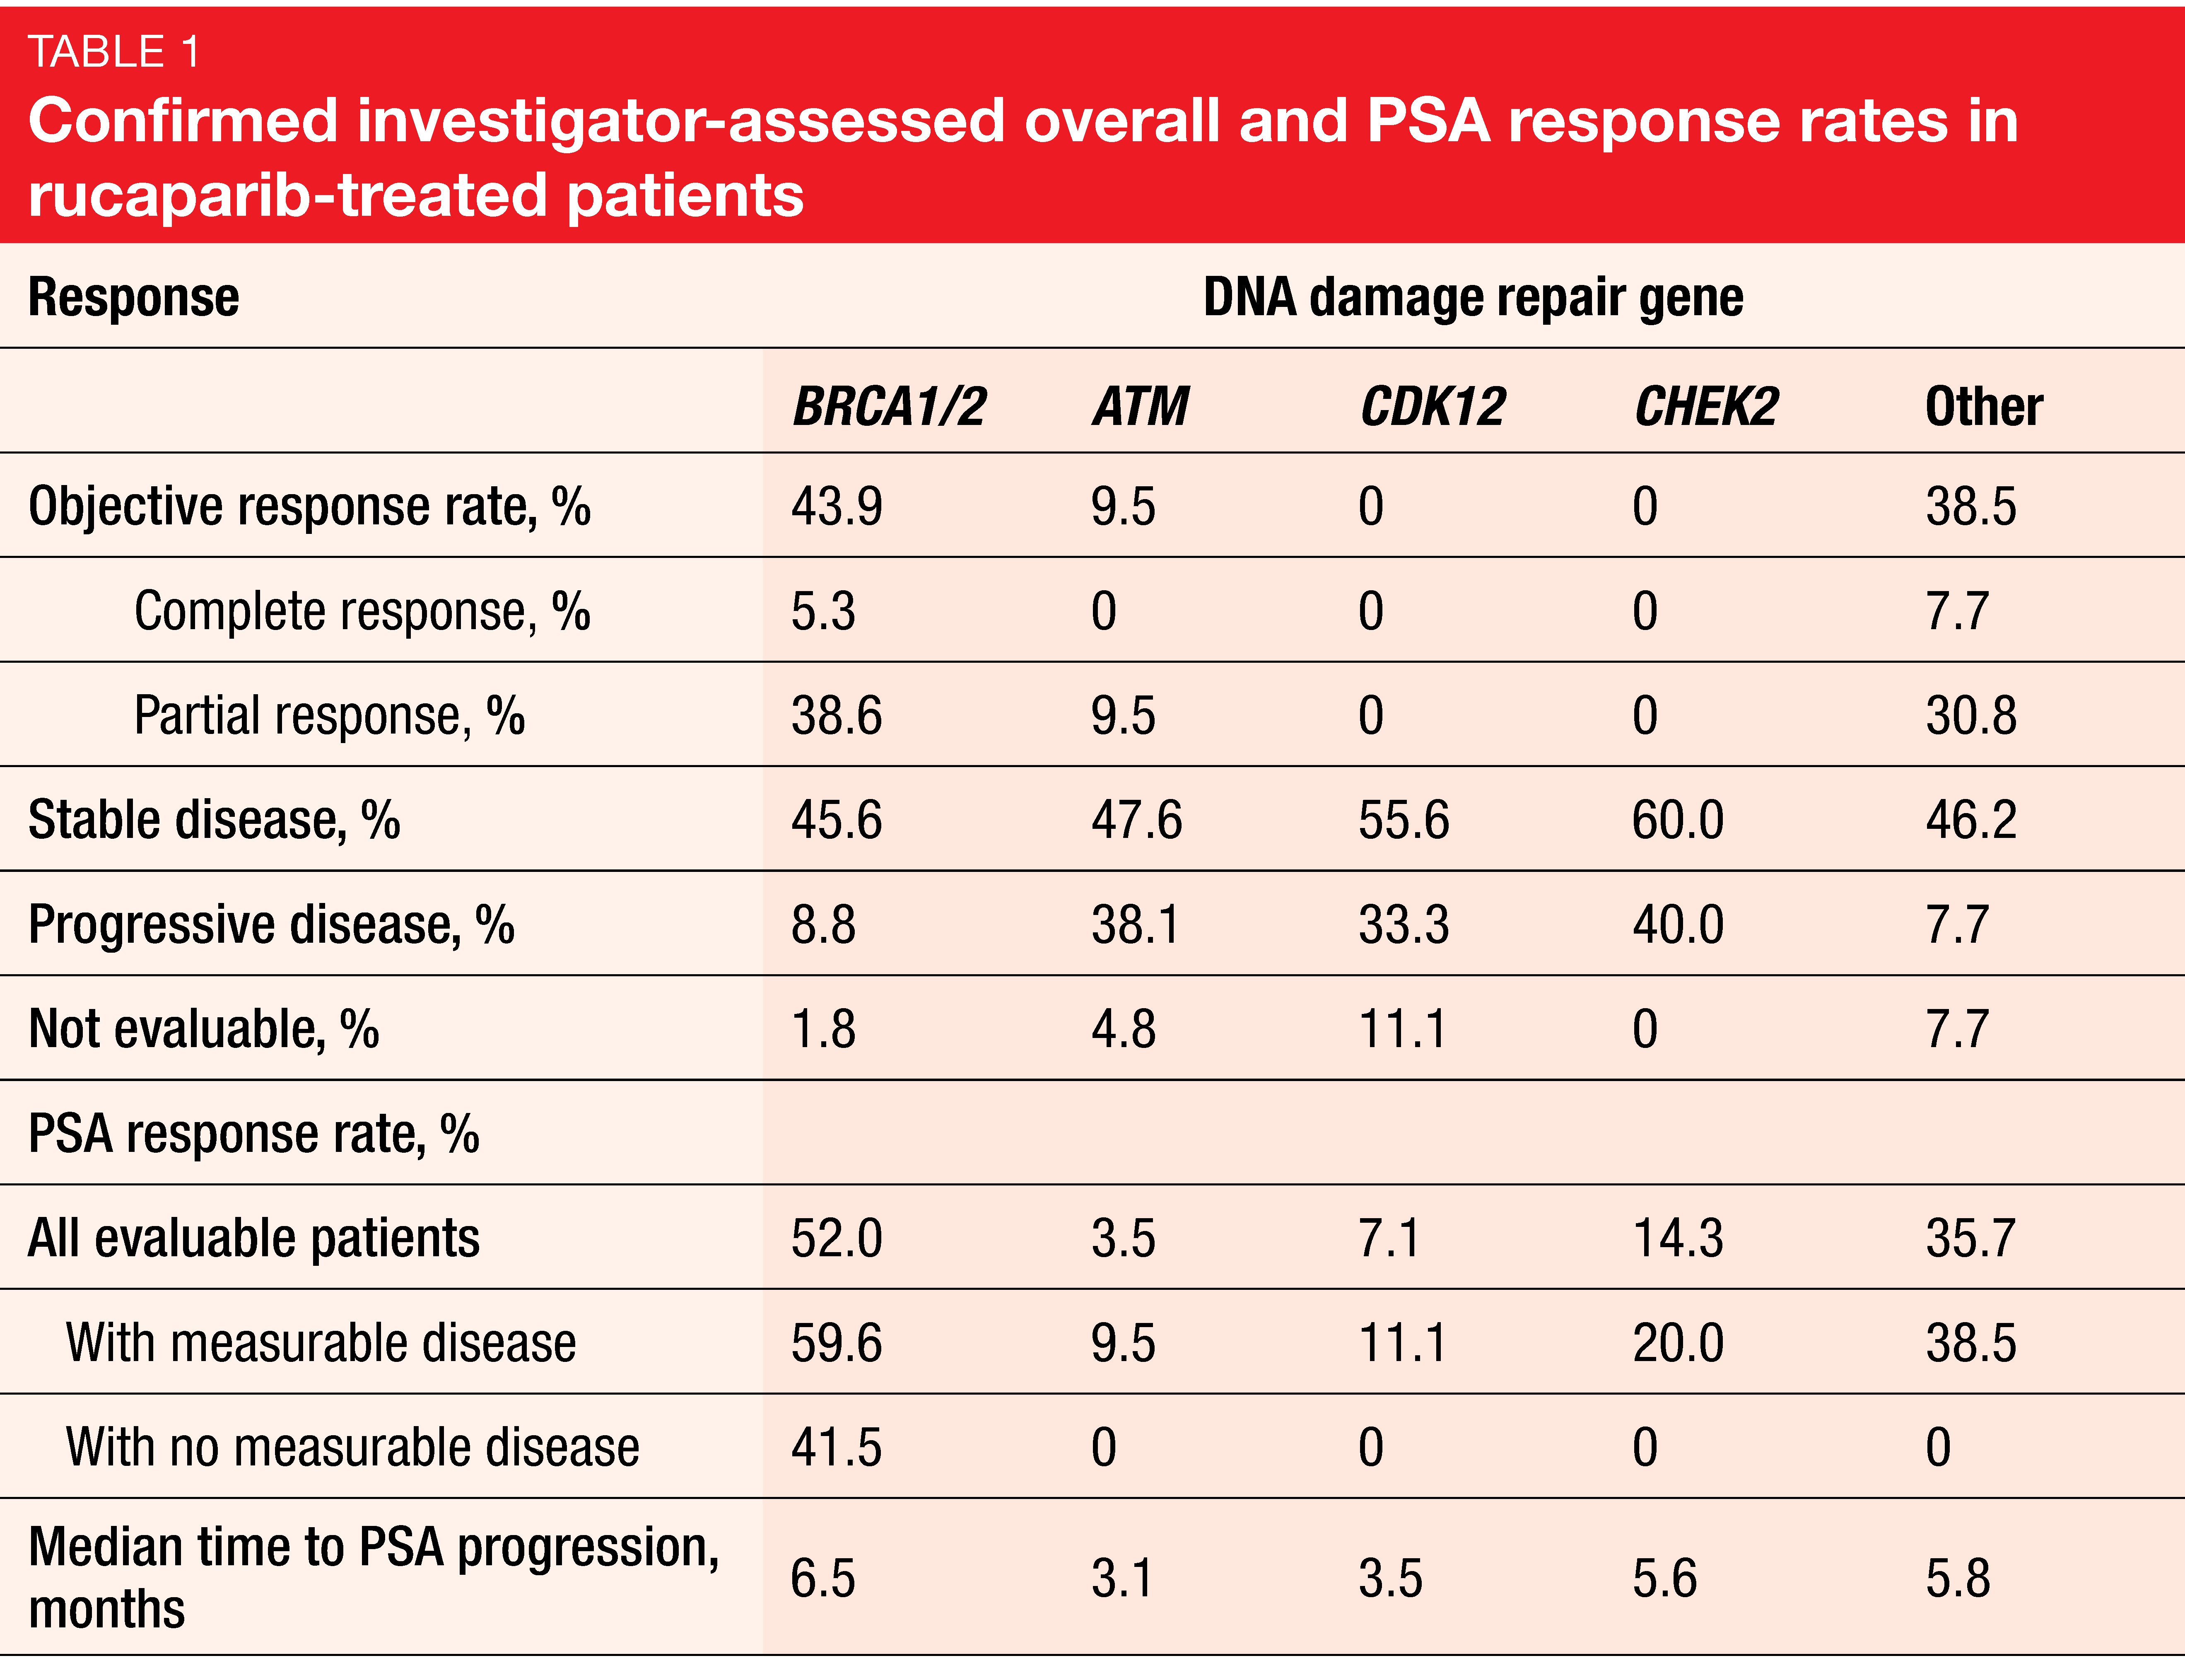 Confirmed investigator-assessed overall and PSA response rates in rucaparib-treated patients